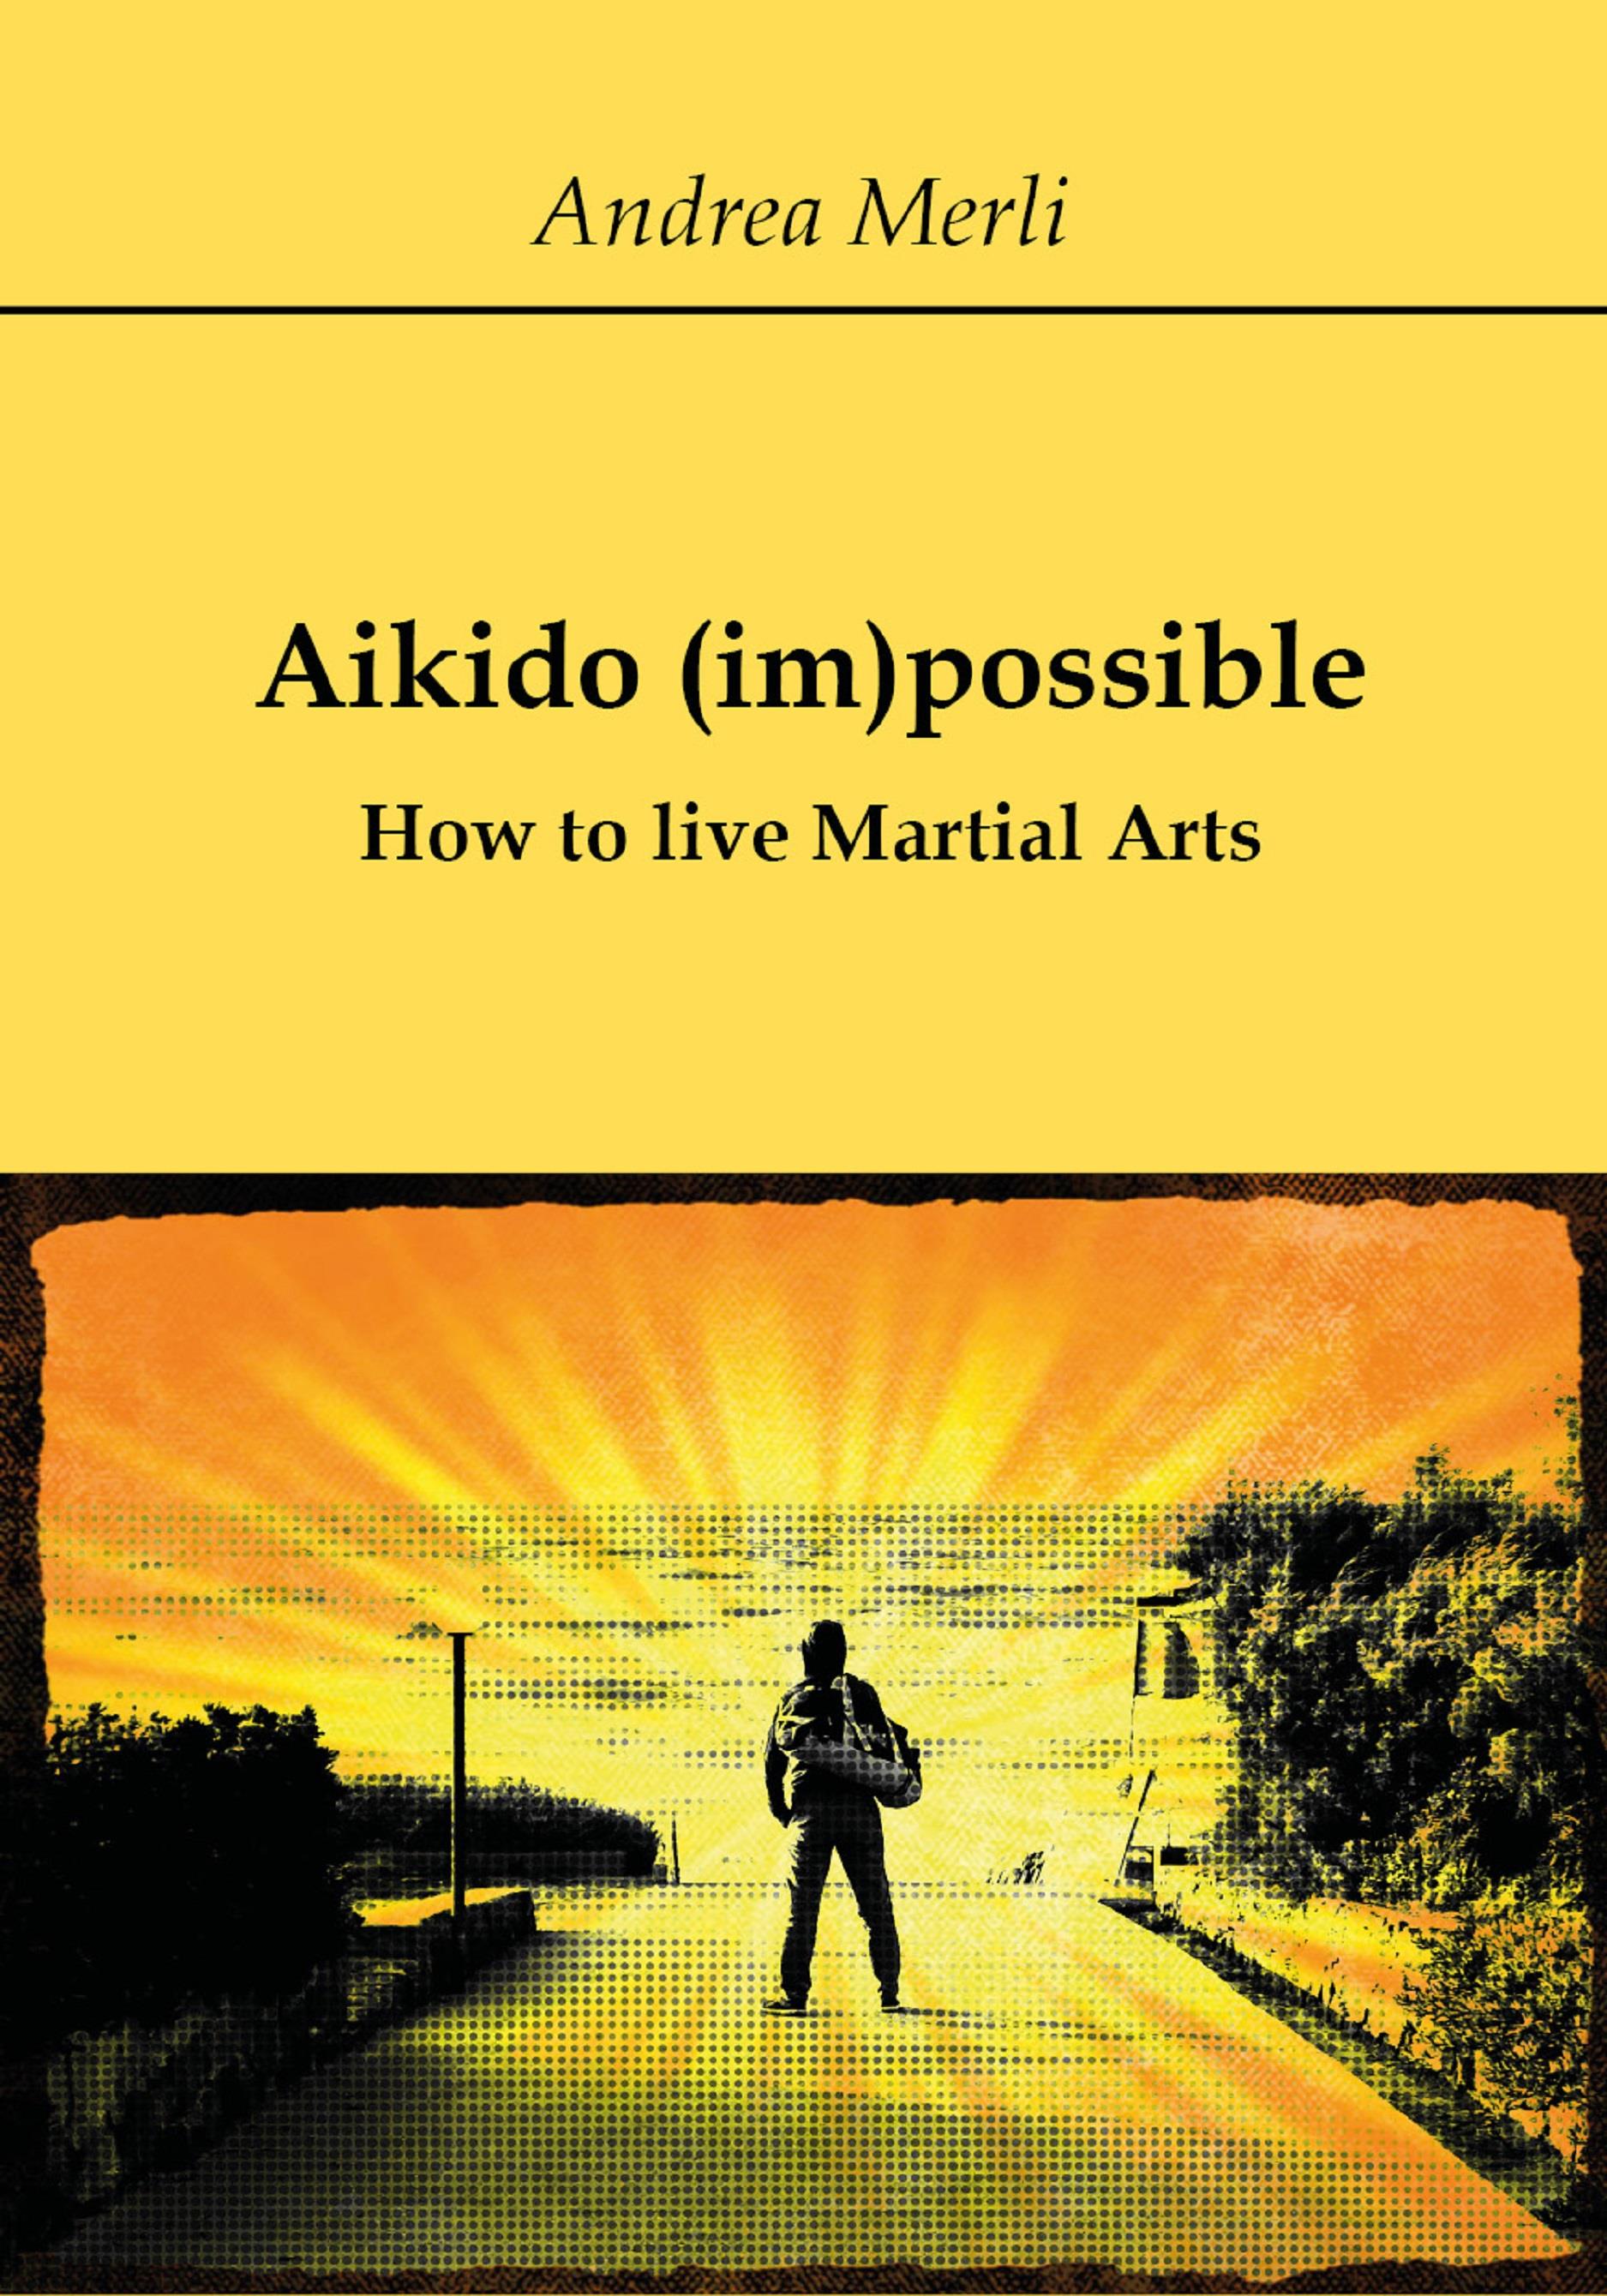 Aikido (im)possible - How to live Martial Arts